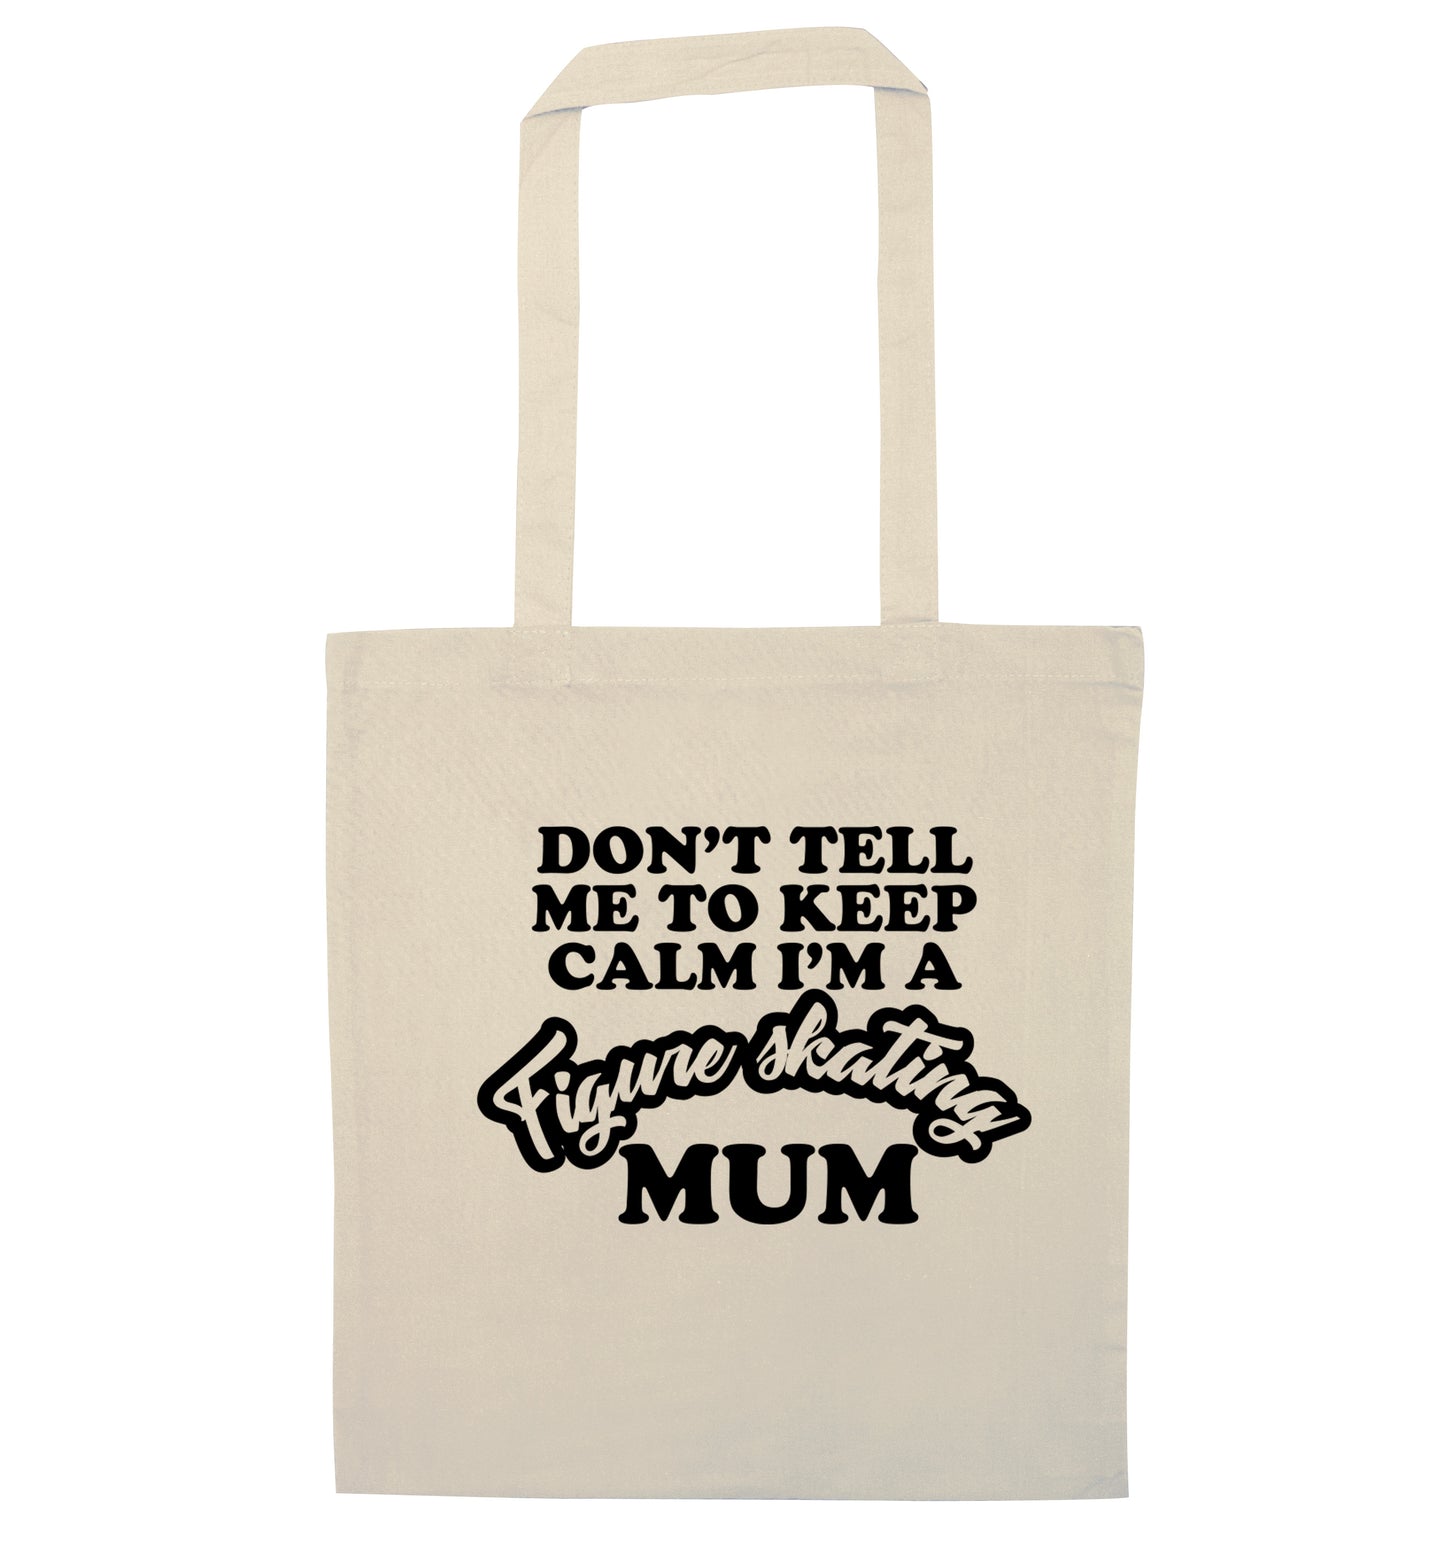 Don't tell me to keep calm I'm a figure skating mum natural tote bag